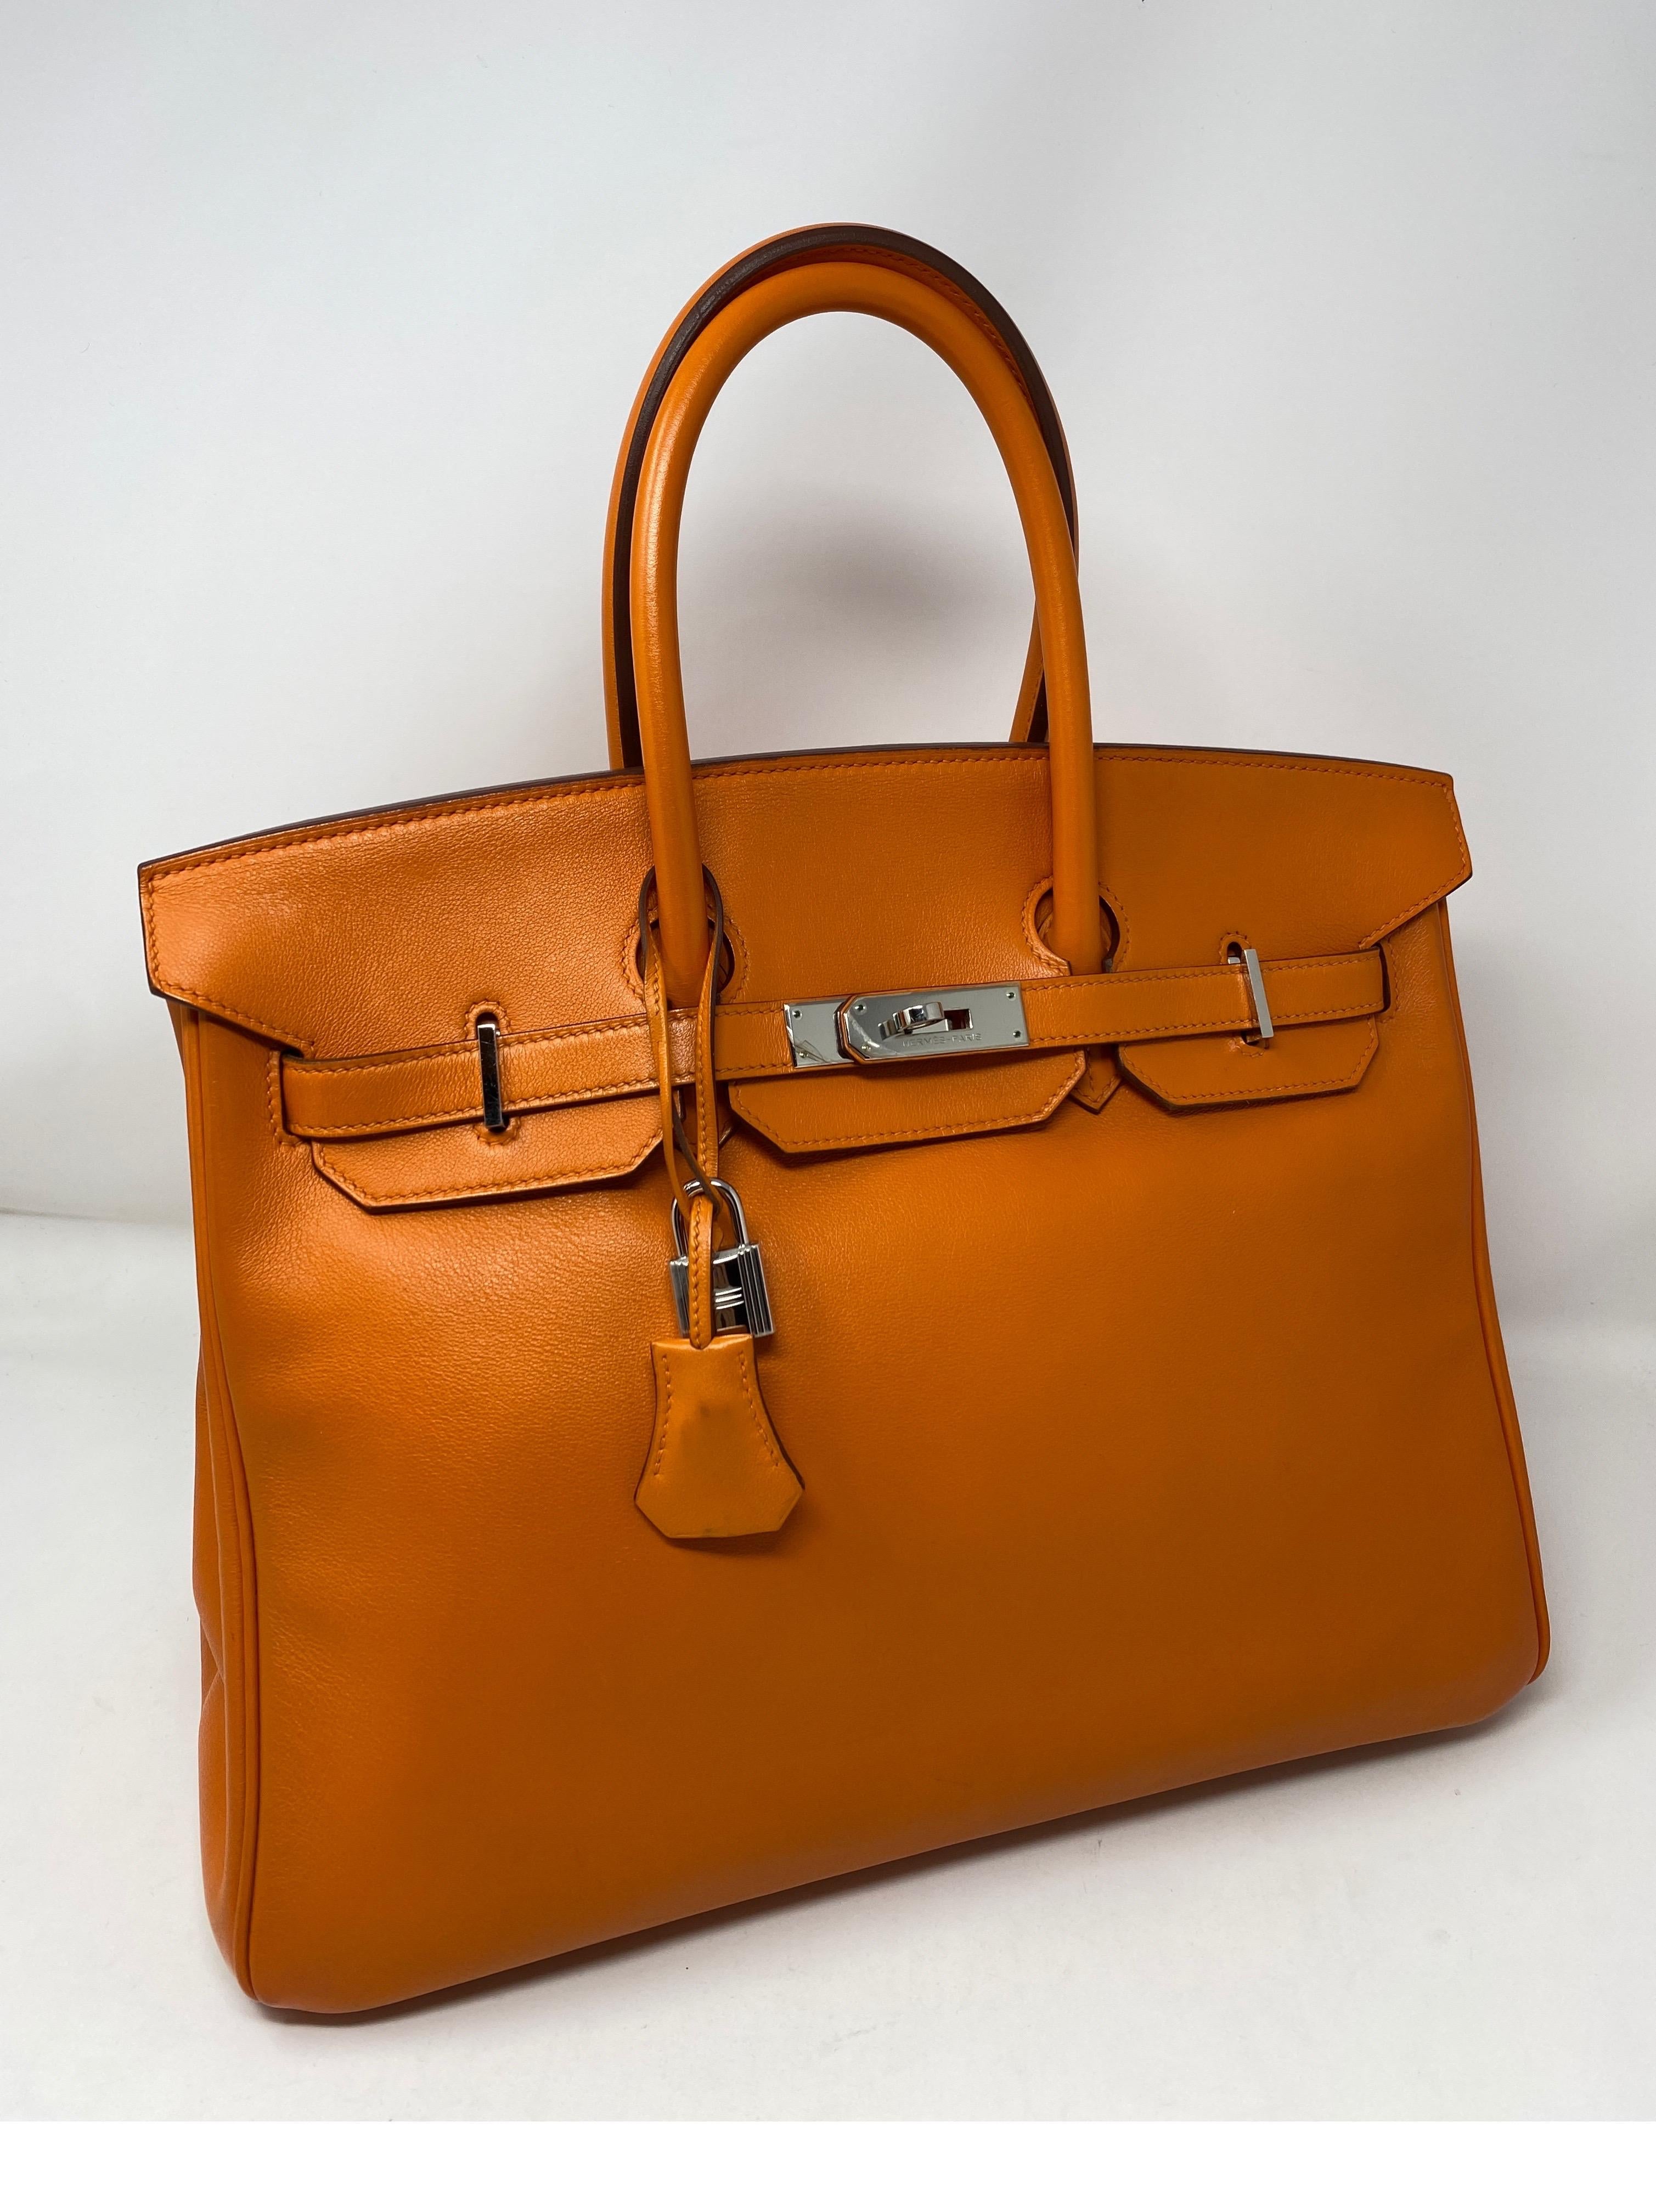 Hermes Orange Birkin 35 Bag. Swift leather. Palladium hardware. Good condition. N square stamp. From 2010. Hermes Orange color. Highly coveted. Includes lock, keys, clochette and dust cover. Invest in the best. Guaranteed authentic. 